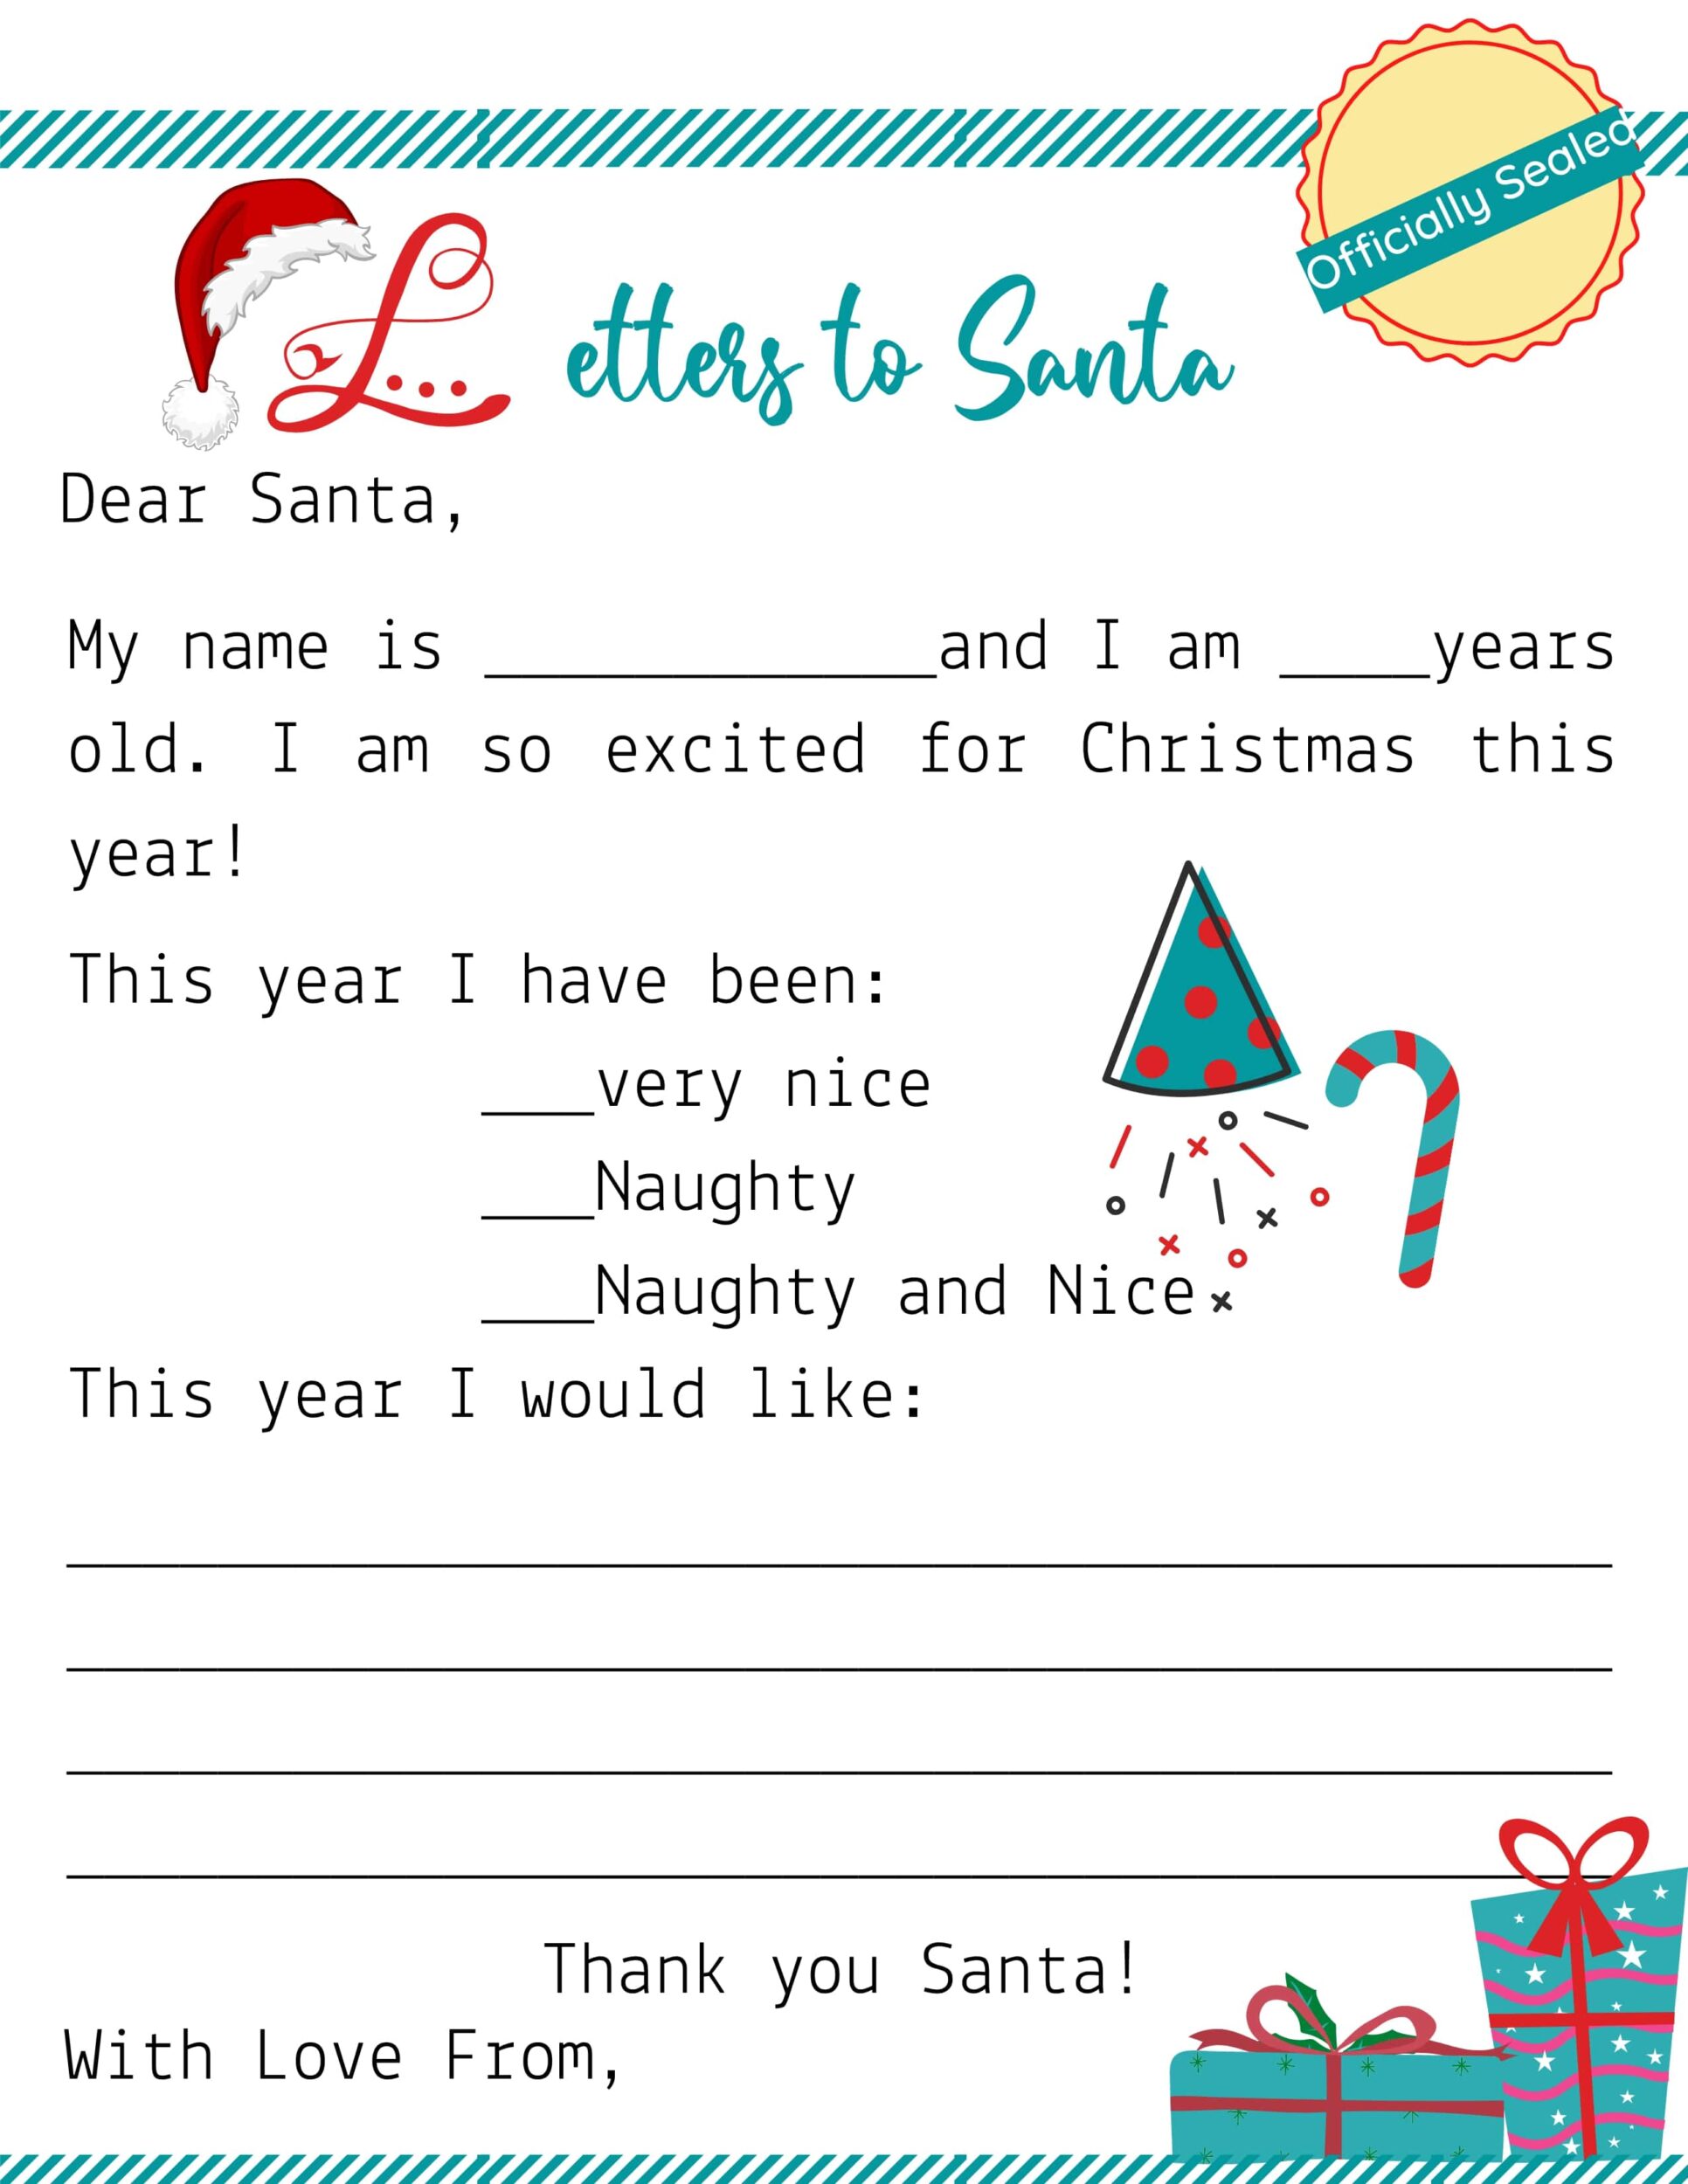 FREE Santa Letter Printable with Envelope and Wish List! - Leap of Intended For Dear Santa Letter Template Free